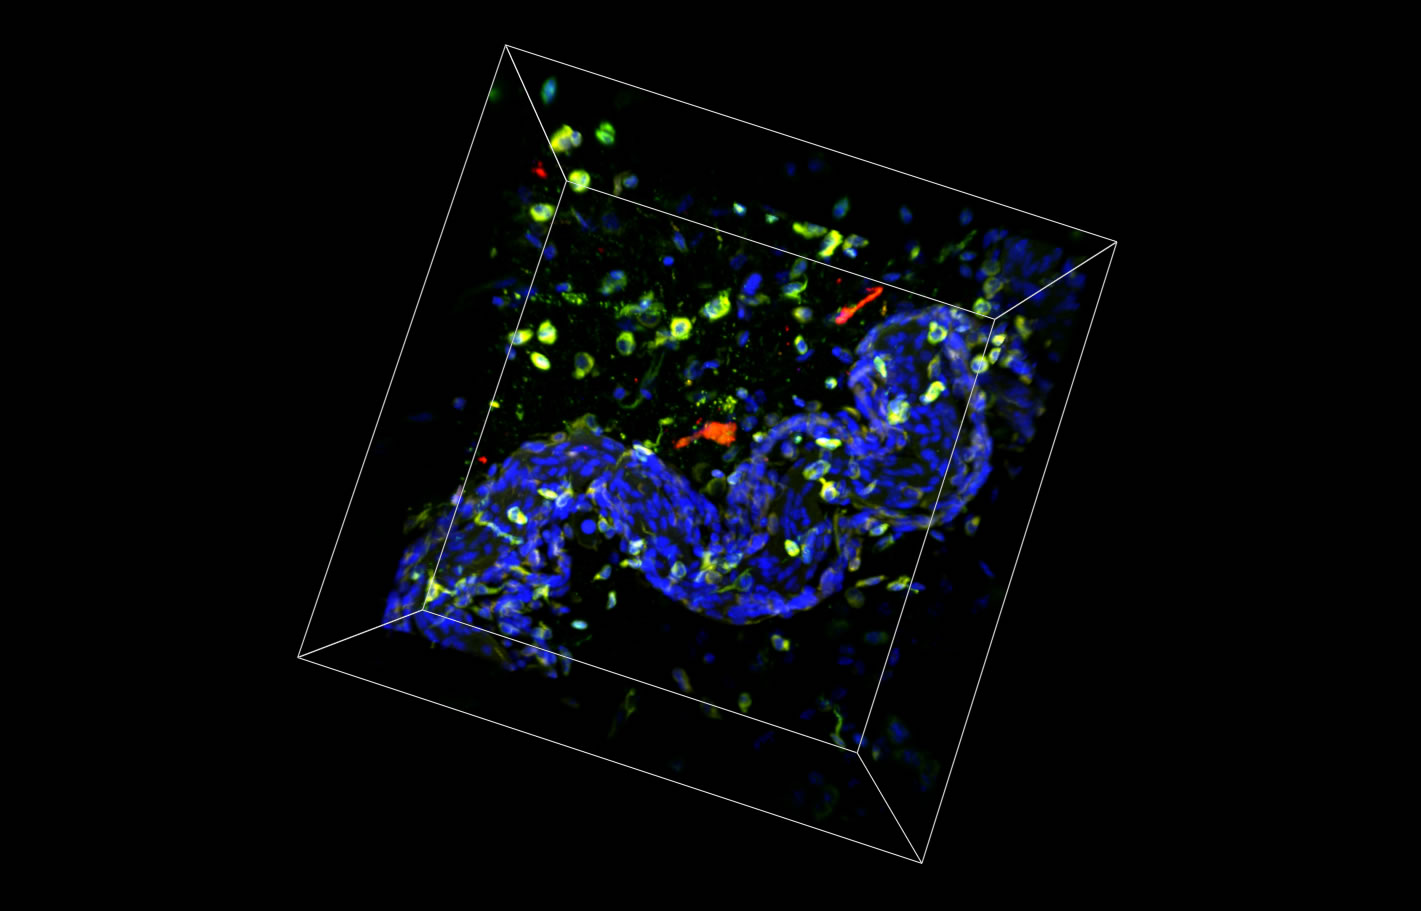 Image of mouse back skin with DAPI (blue), Beta-catenin (β-catenin) shown in green, Vimentin (yellow), and Pan-cadherin shown in red